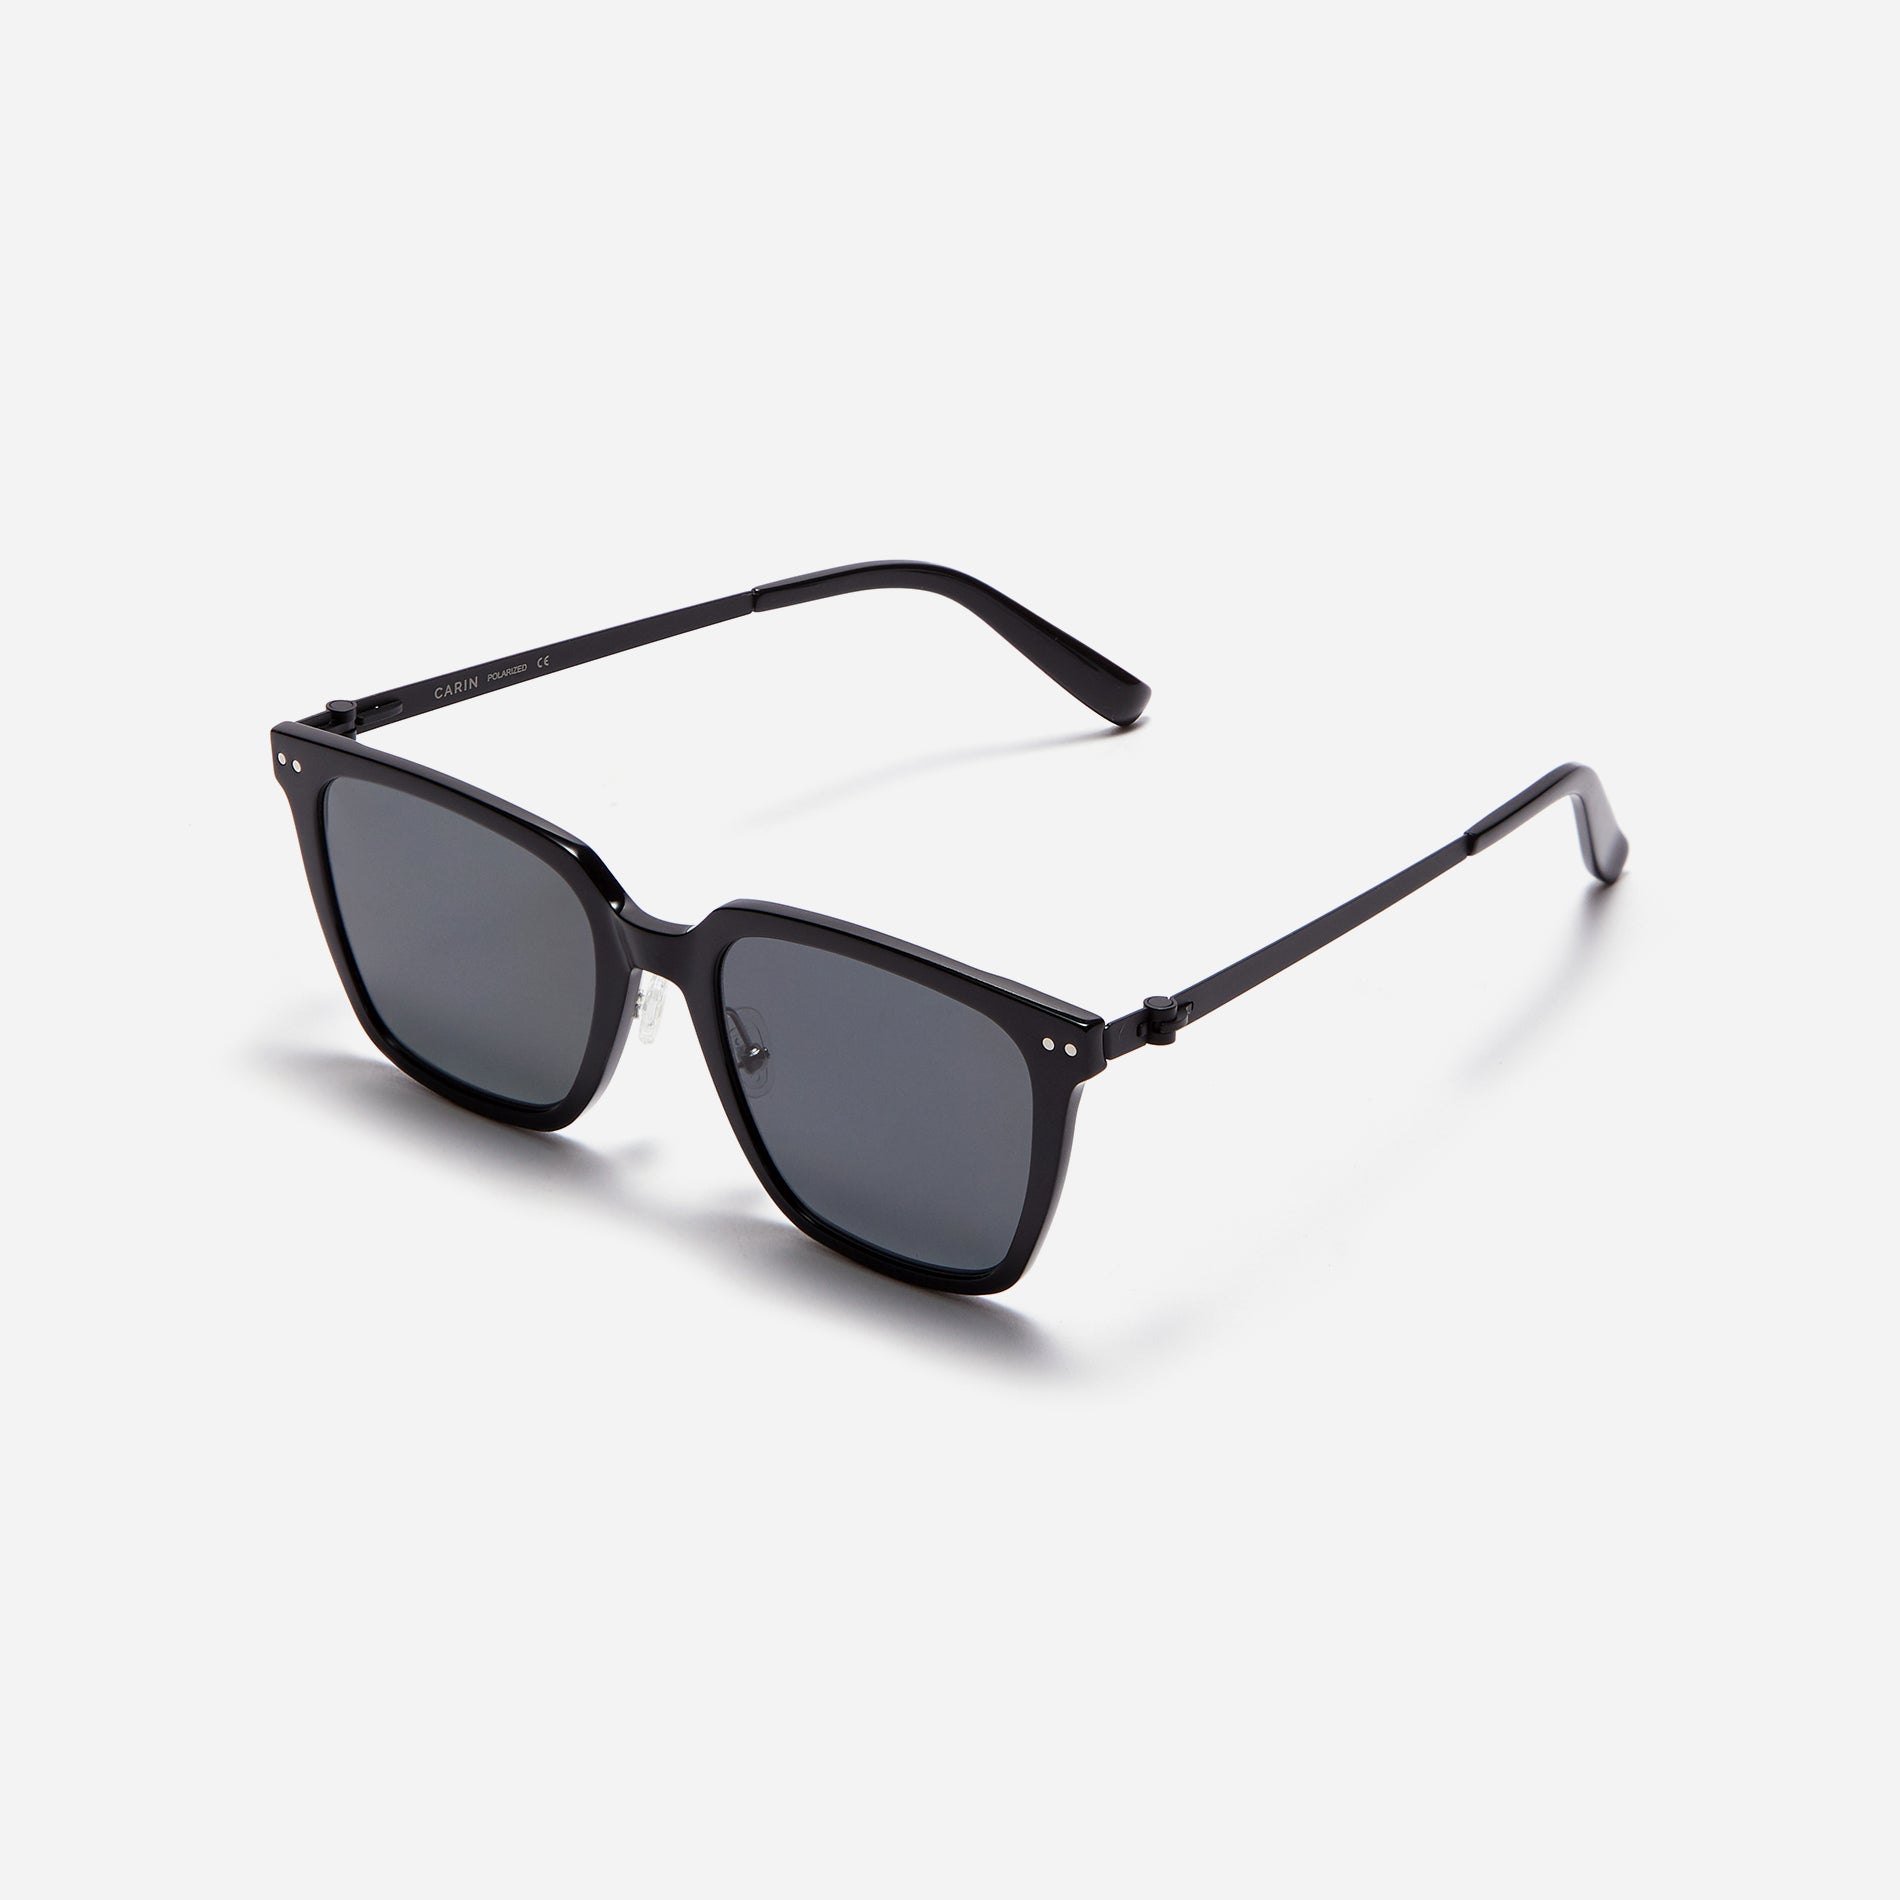 Square-shaped polarized sunglasses, representing CARIN’s POLARIZED line. Crafted from lightweight and durable bio-plastic to prevent slipping